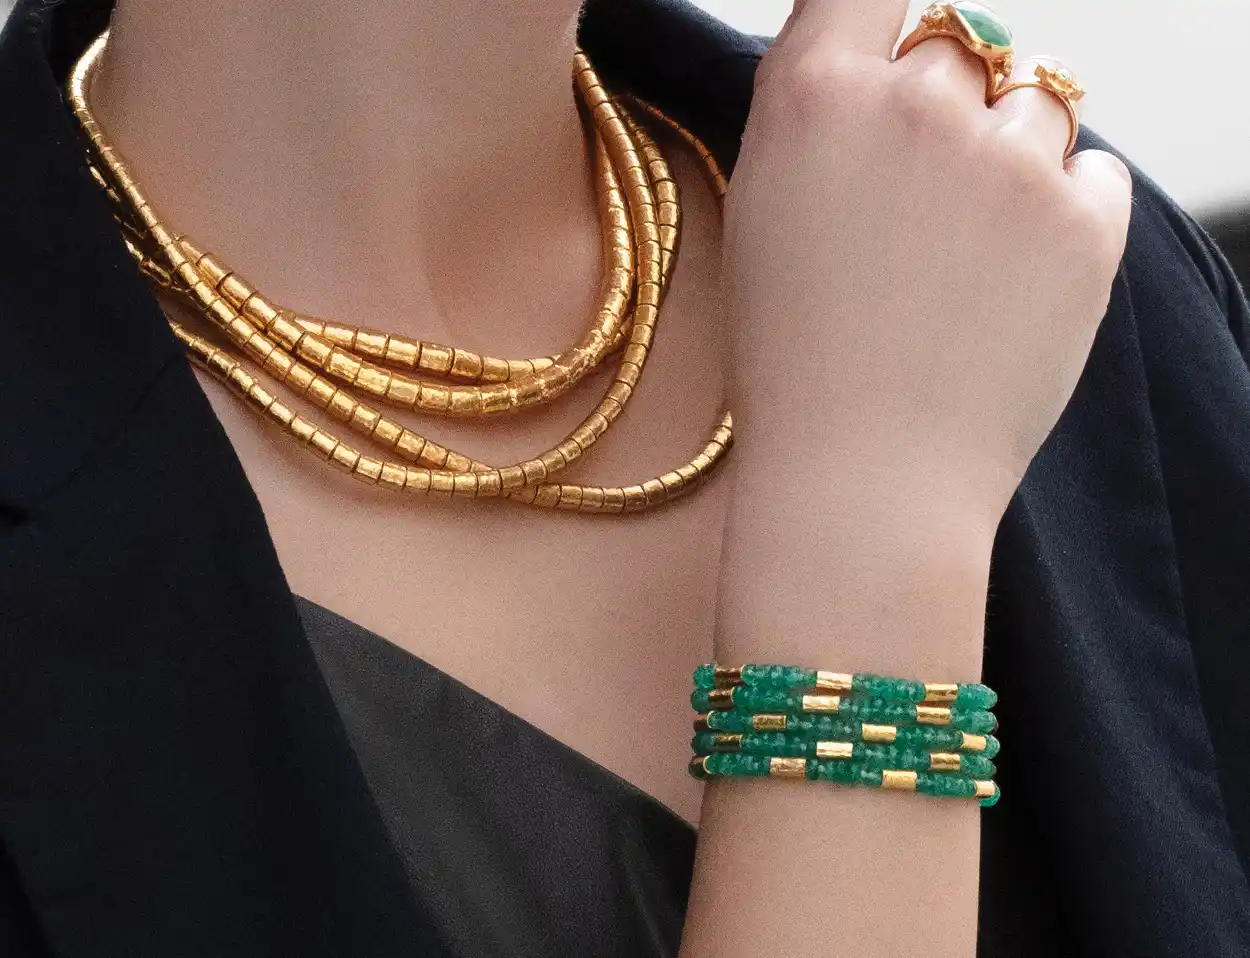 An image of a woman wearing jewelry by Gurhan: necklace, rings, and bracelets.